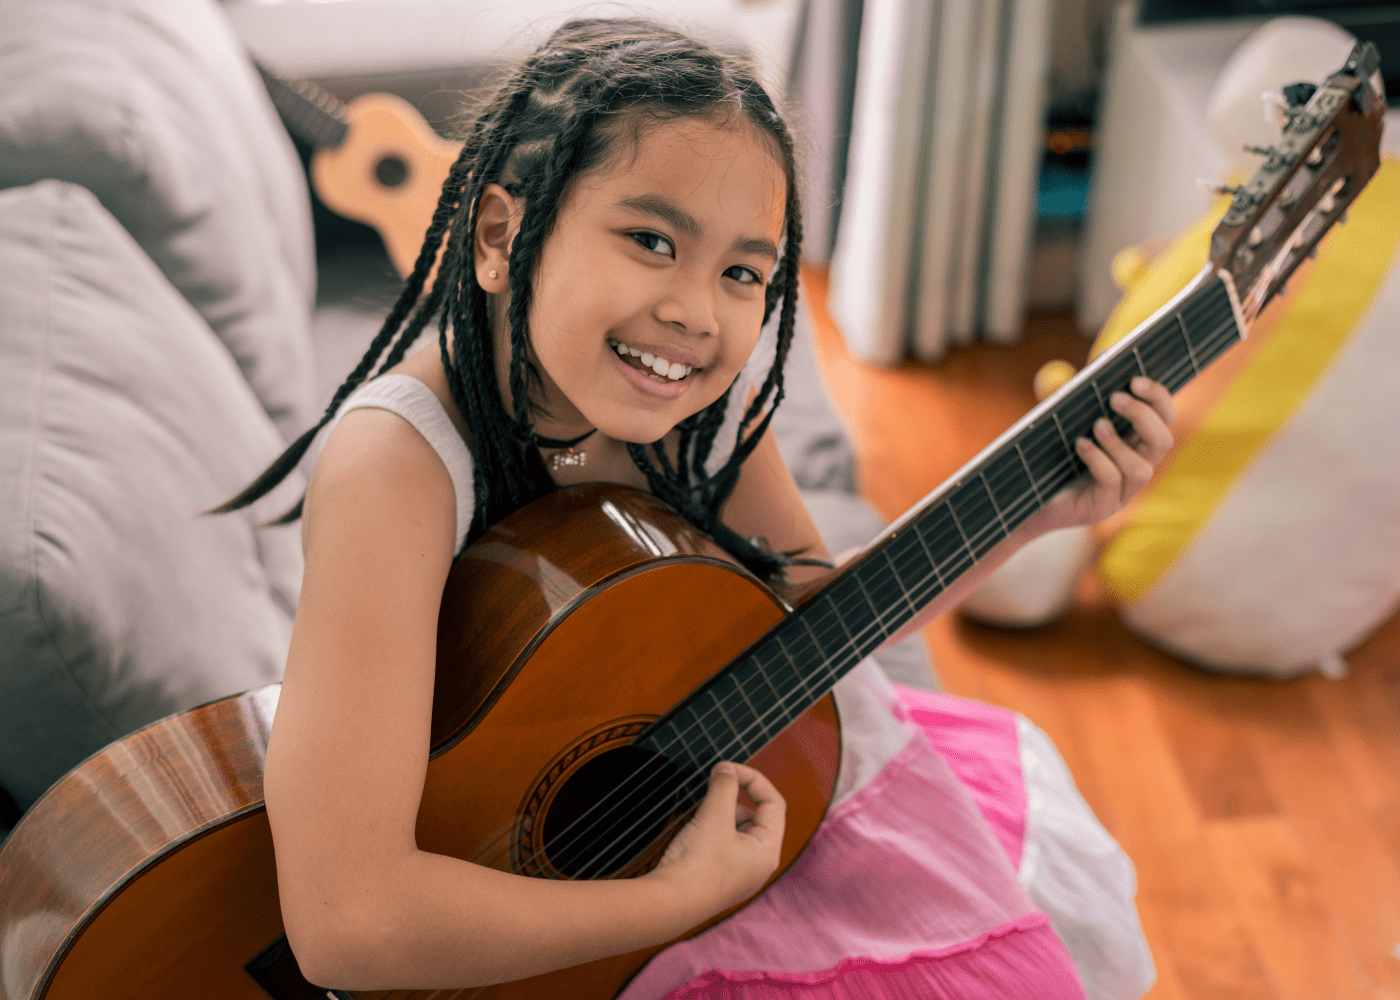 A young girl holding a guitar.